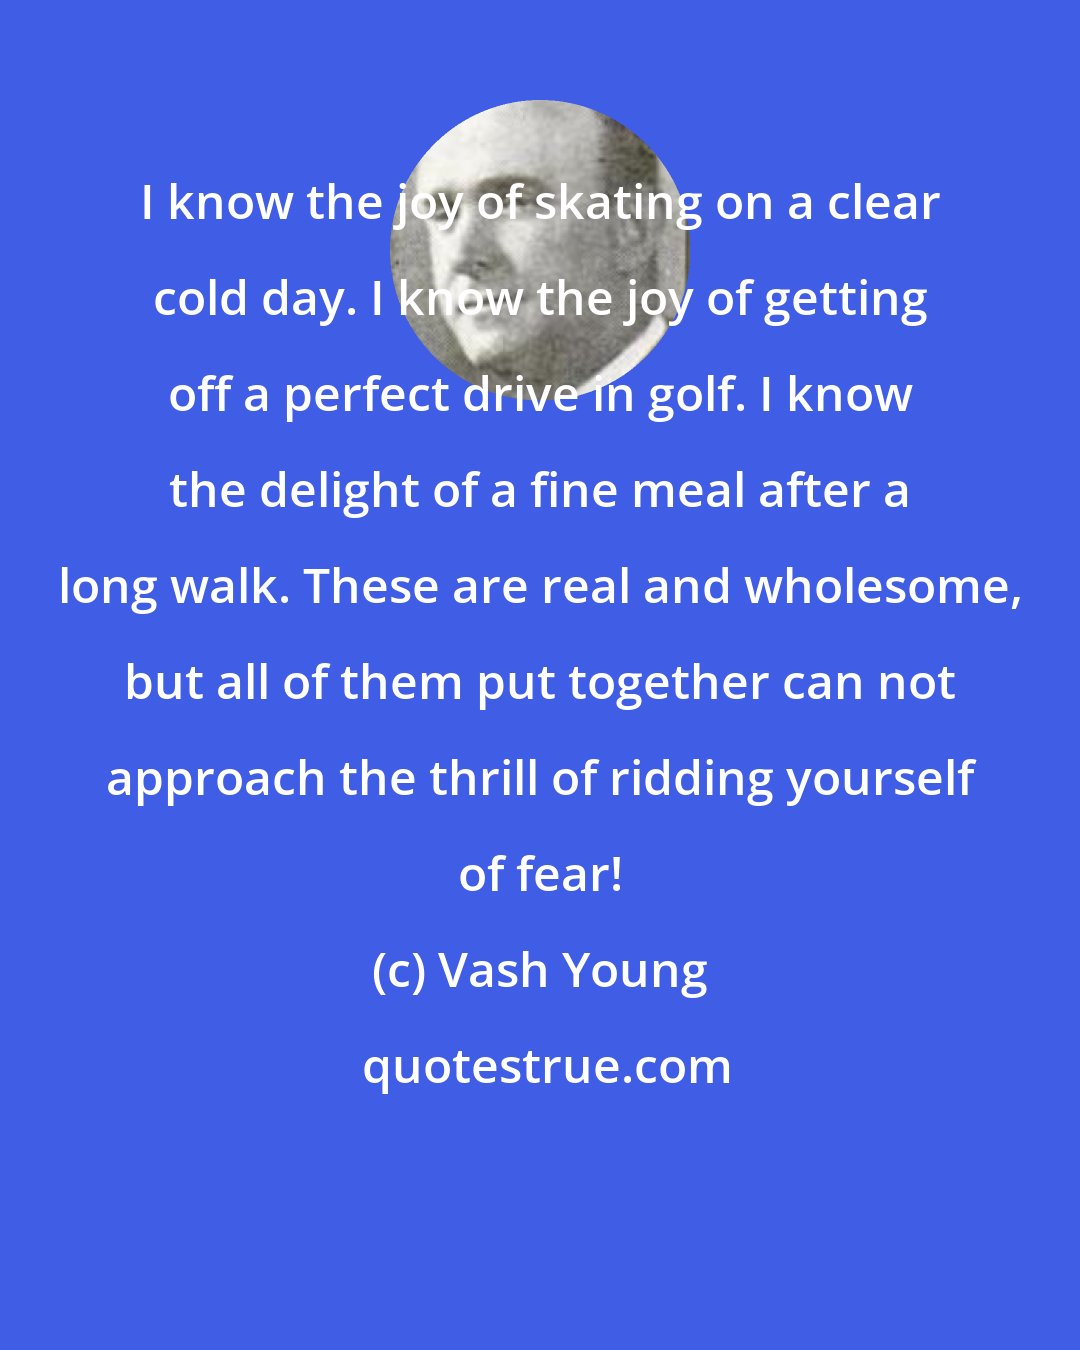 Vash Young: I know the joy of skating on a clear cold day. I know the joy of getting off a perfect drive in golf. I know the delight of a fine meal after a long walk. These are real and wholesome, but all of them put together can not approach the thrill of ridding yourself of fear!